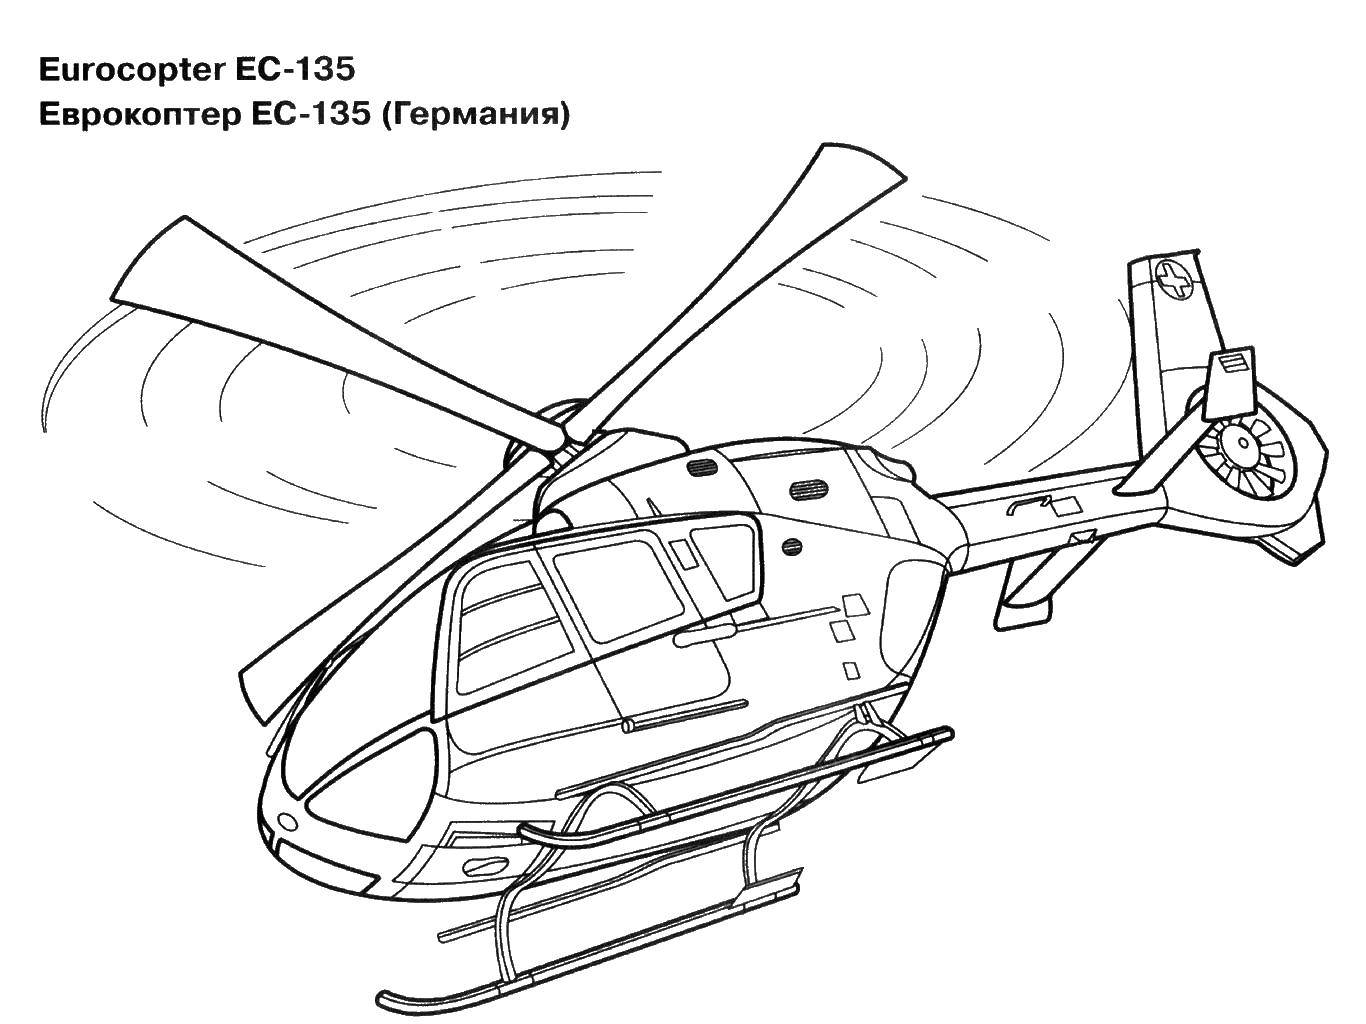 Coloring Eurocopter EC 135. Category Helicopters. Tags:  Eurocopter, helicopter.